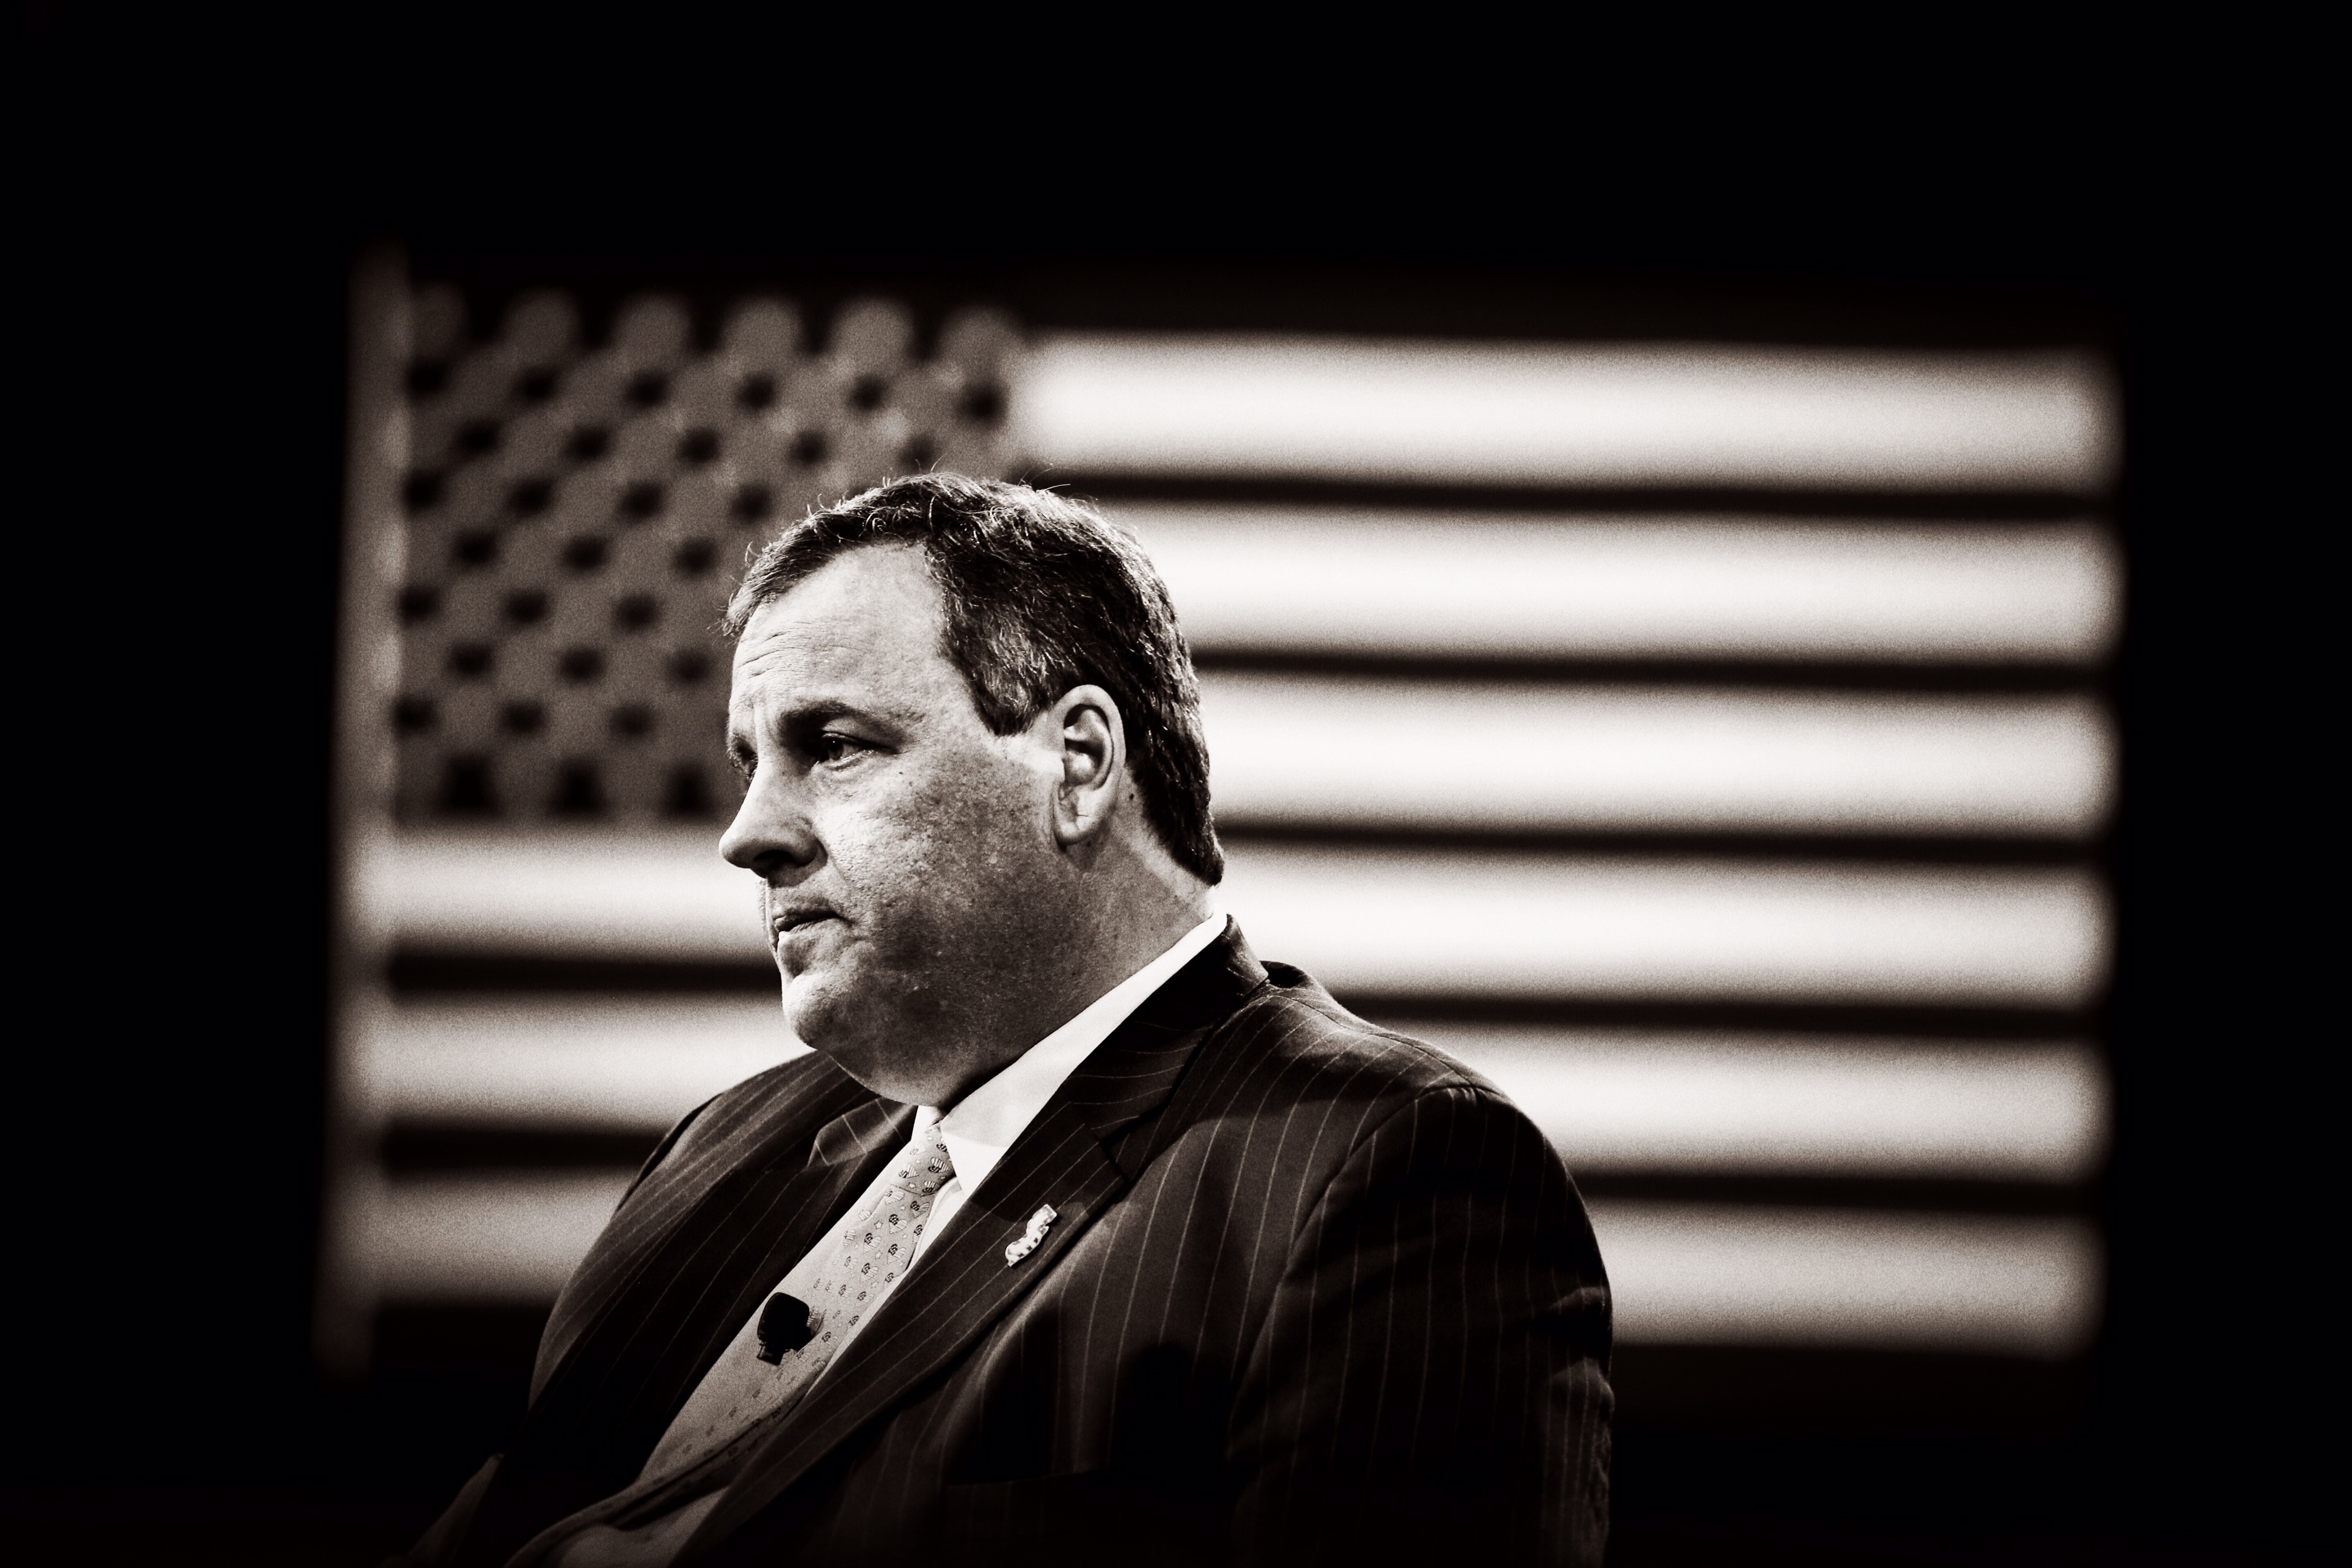 New Jersey governor Chris Christie on stage at CPAC in National Harbor, Md. on Feb. 26, 2015. (Mark Peterson—Redux for TIME)